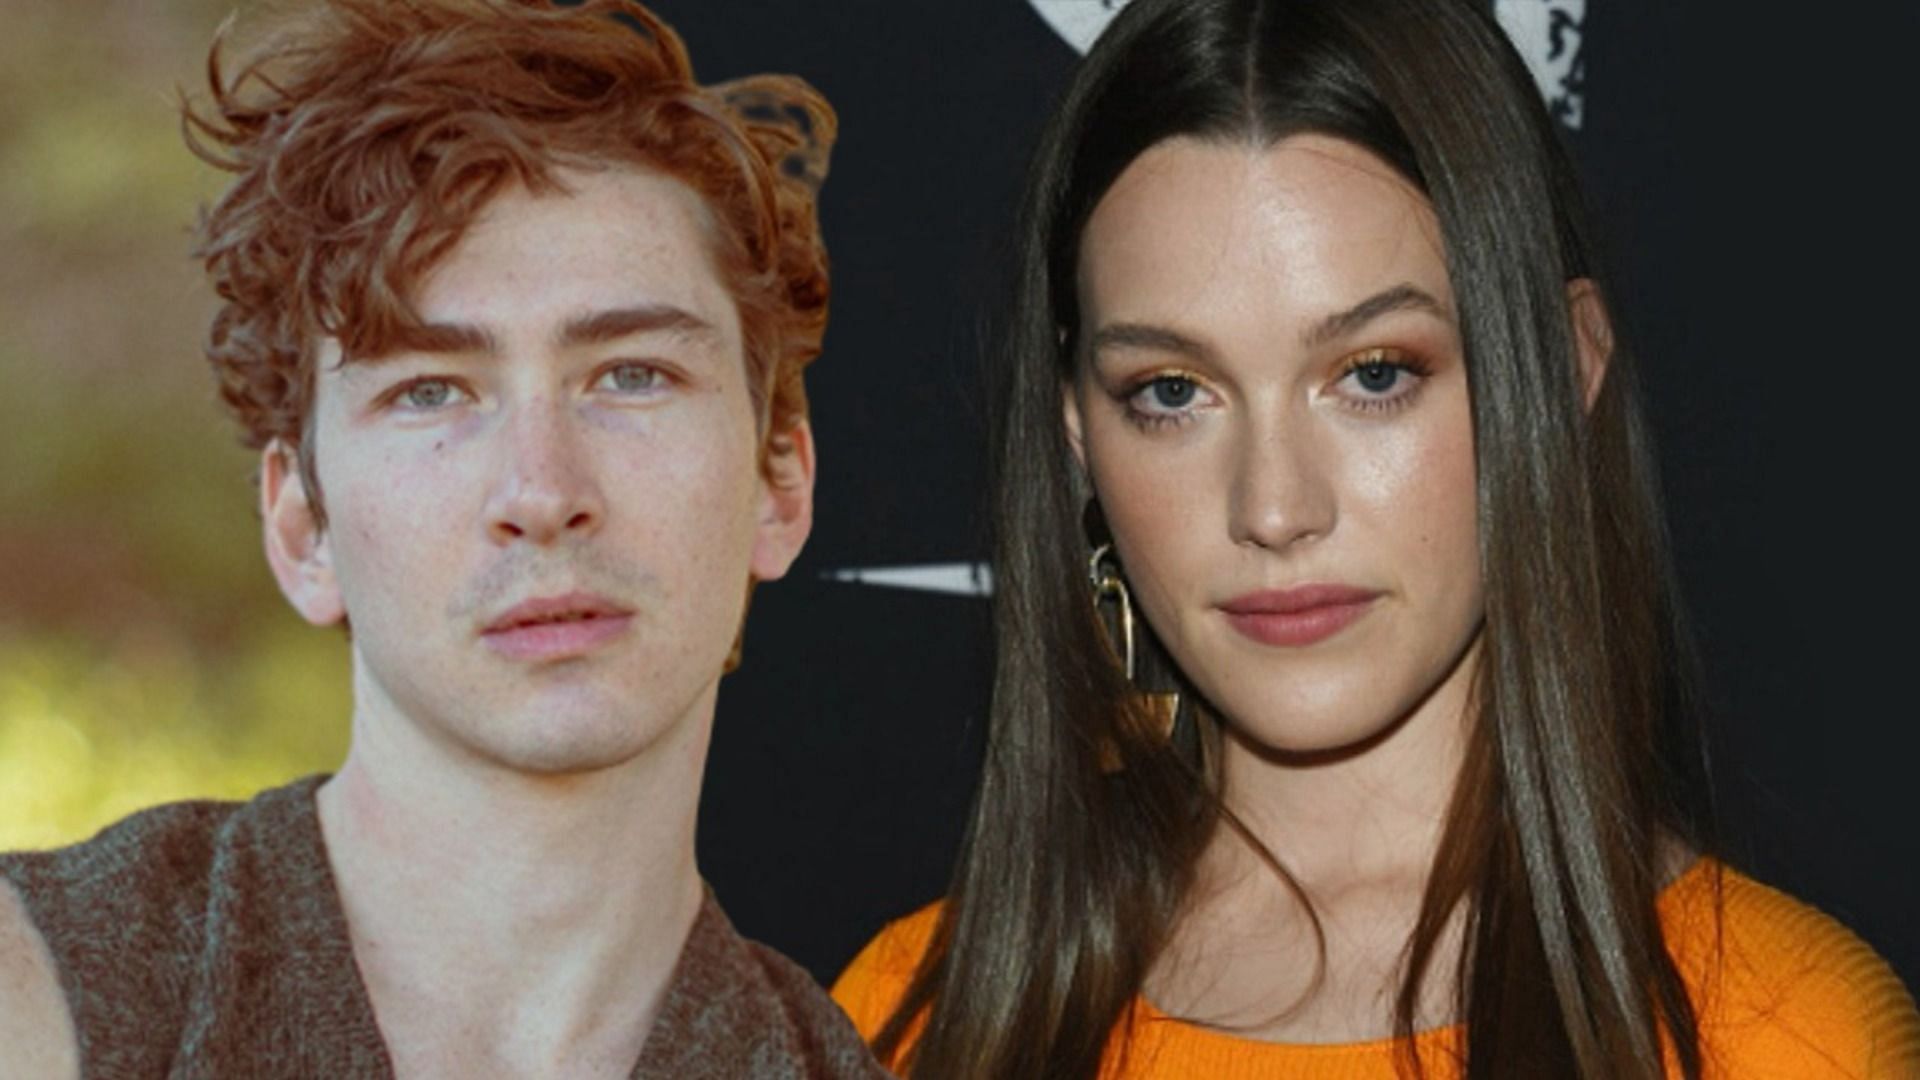 Victoria Pedretti and Dylan Arnold sparked romance rumors after being spotted together in Los Angeles (Image via Getty Images)